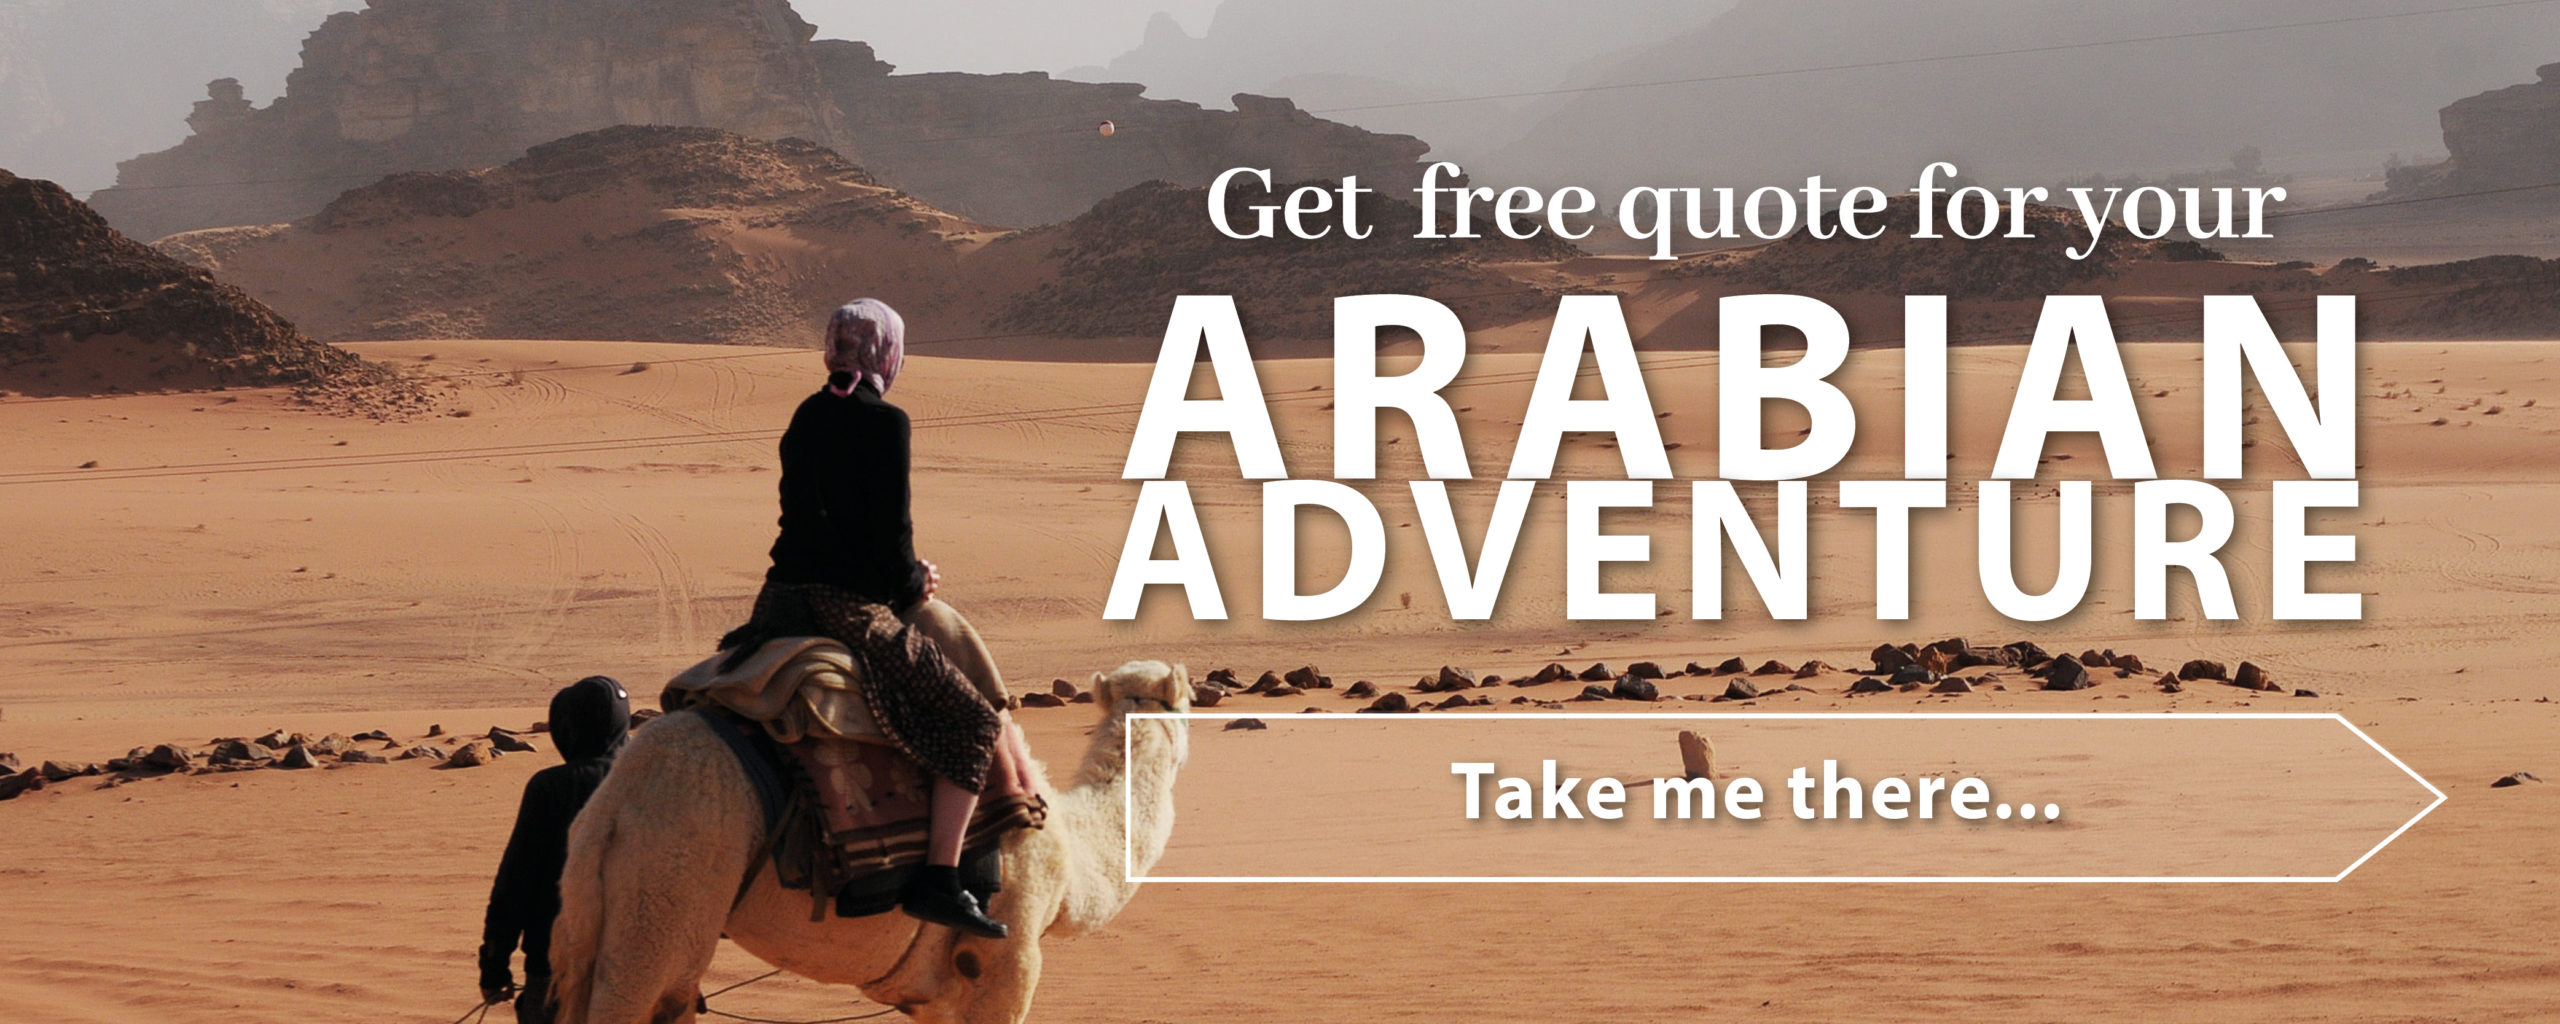 Get a quote for your Arabian adventure